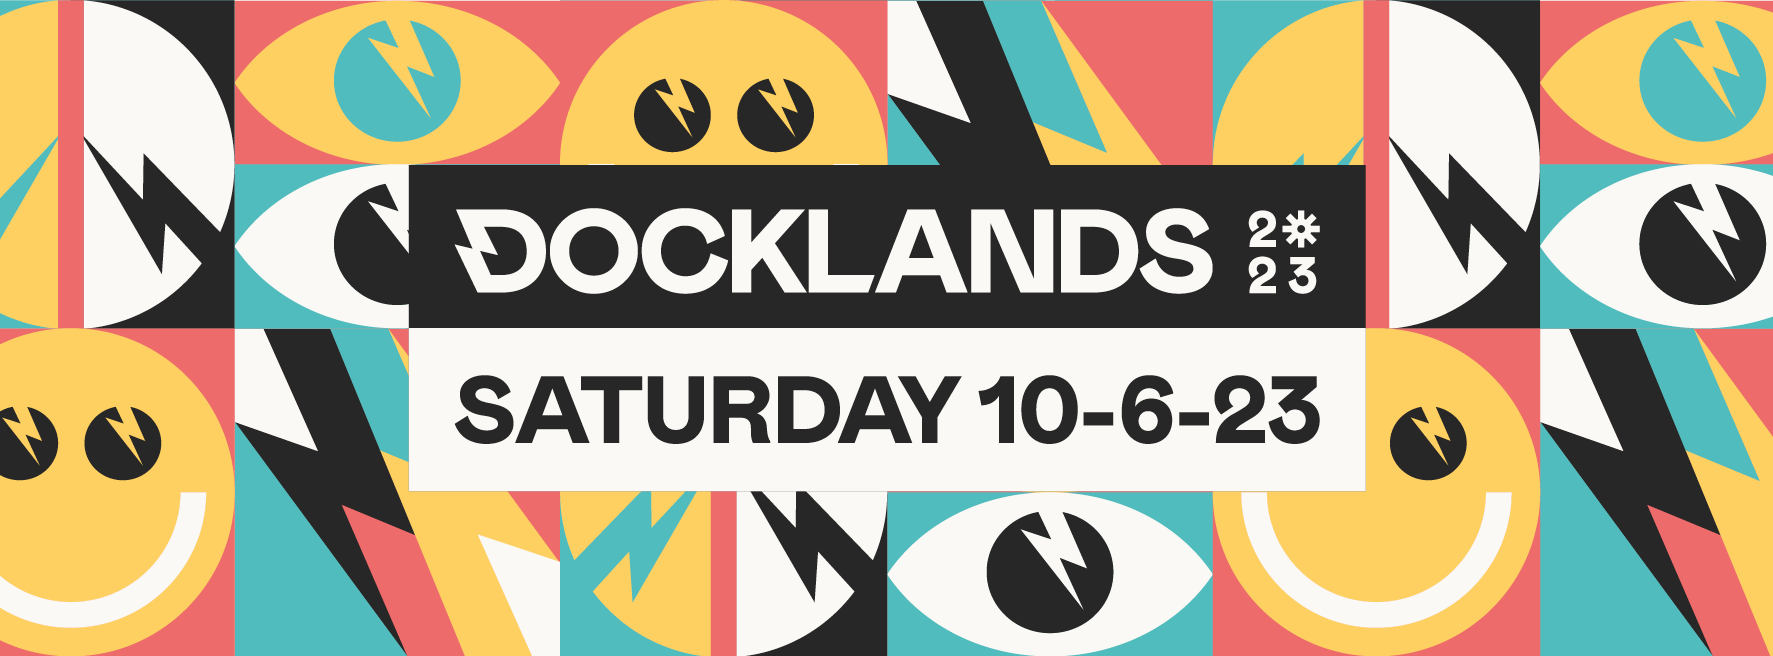 Docklands Festival 2023 - フライヤー表